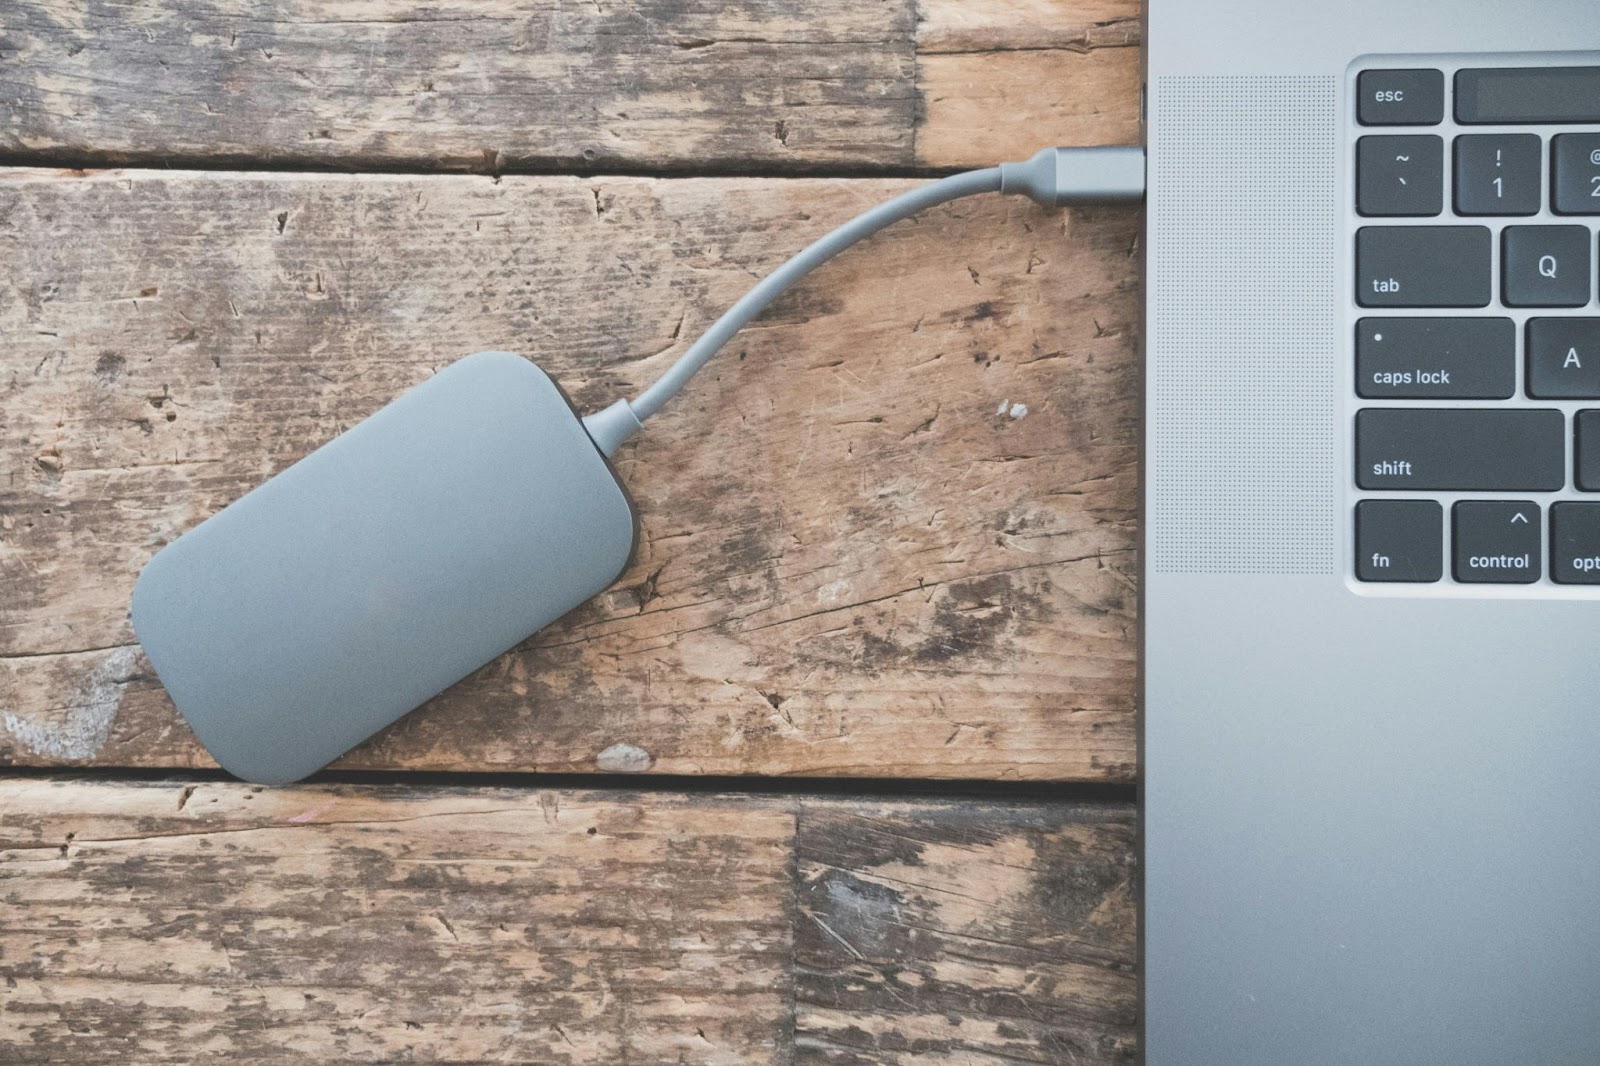 An external hard drive connected to a laptop.